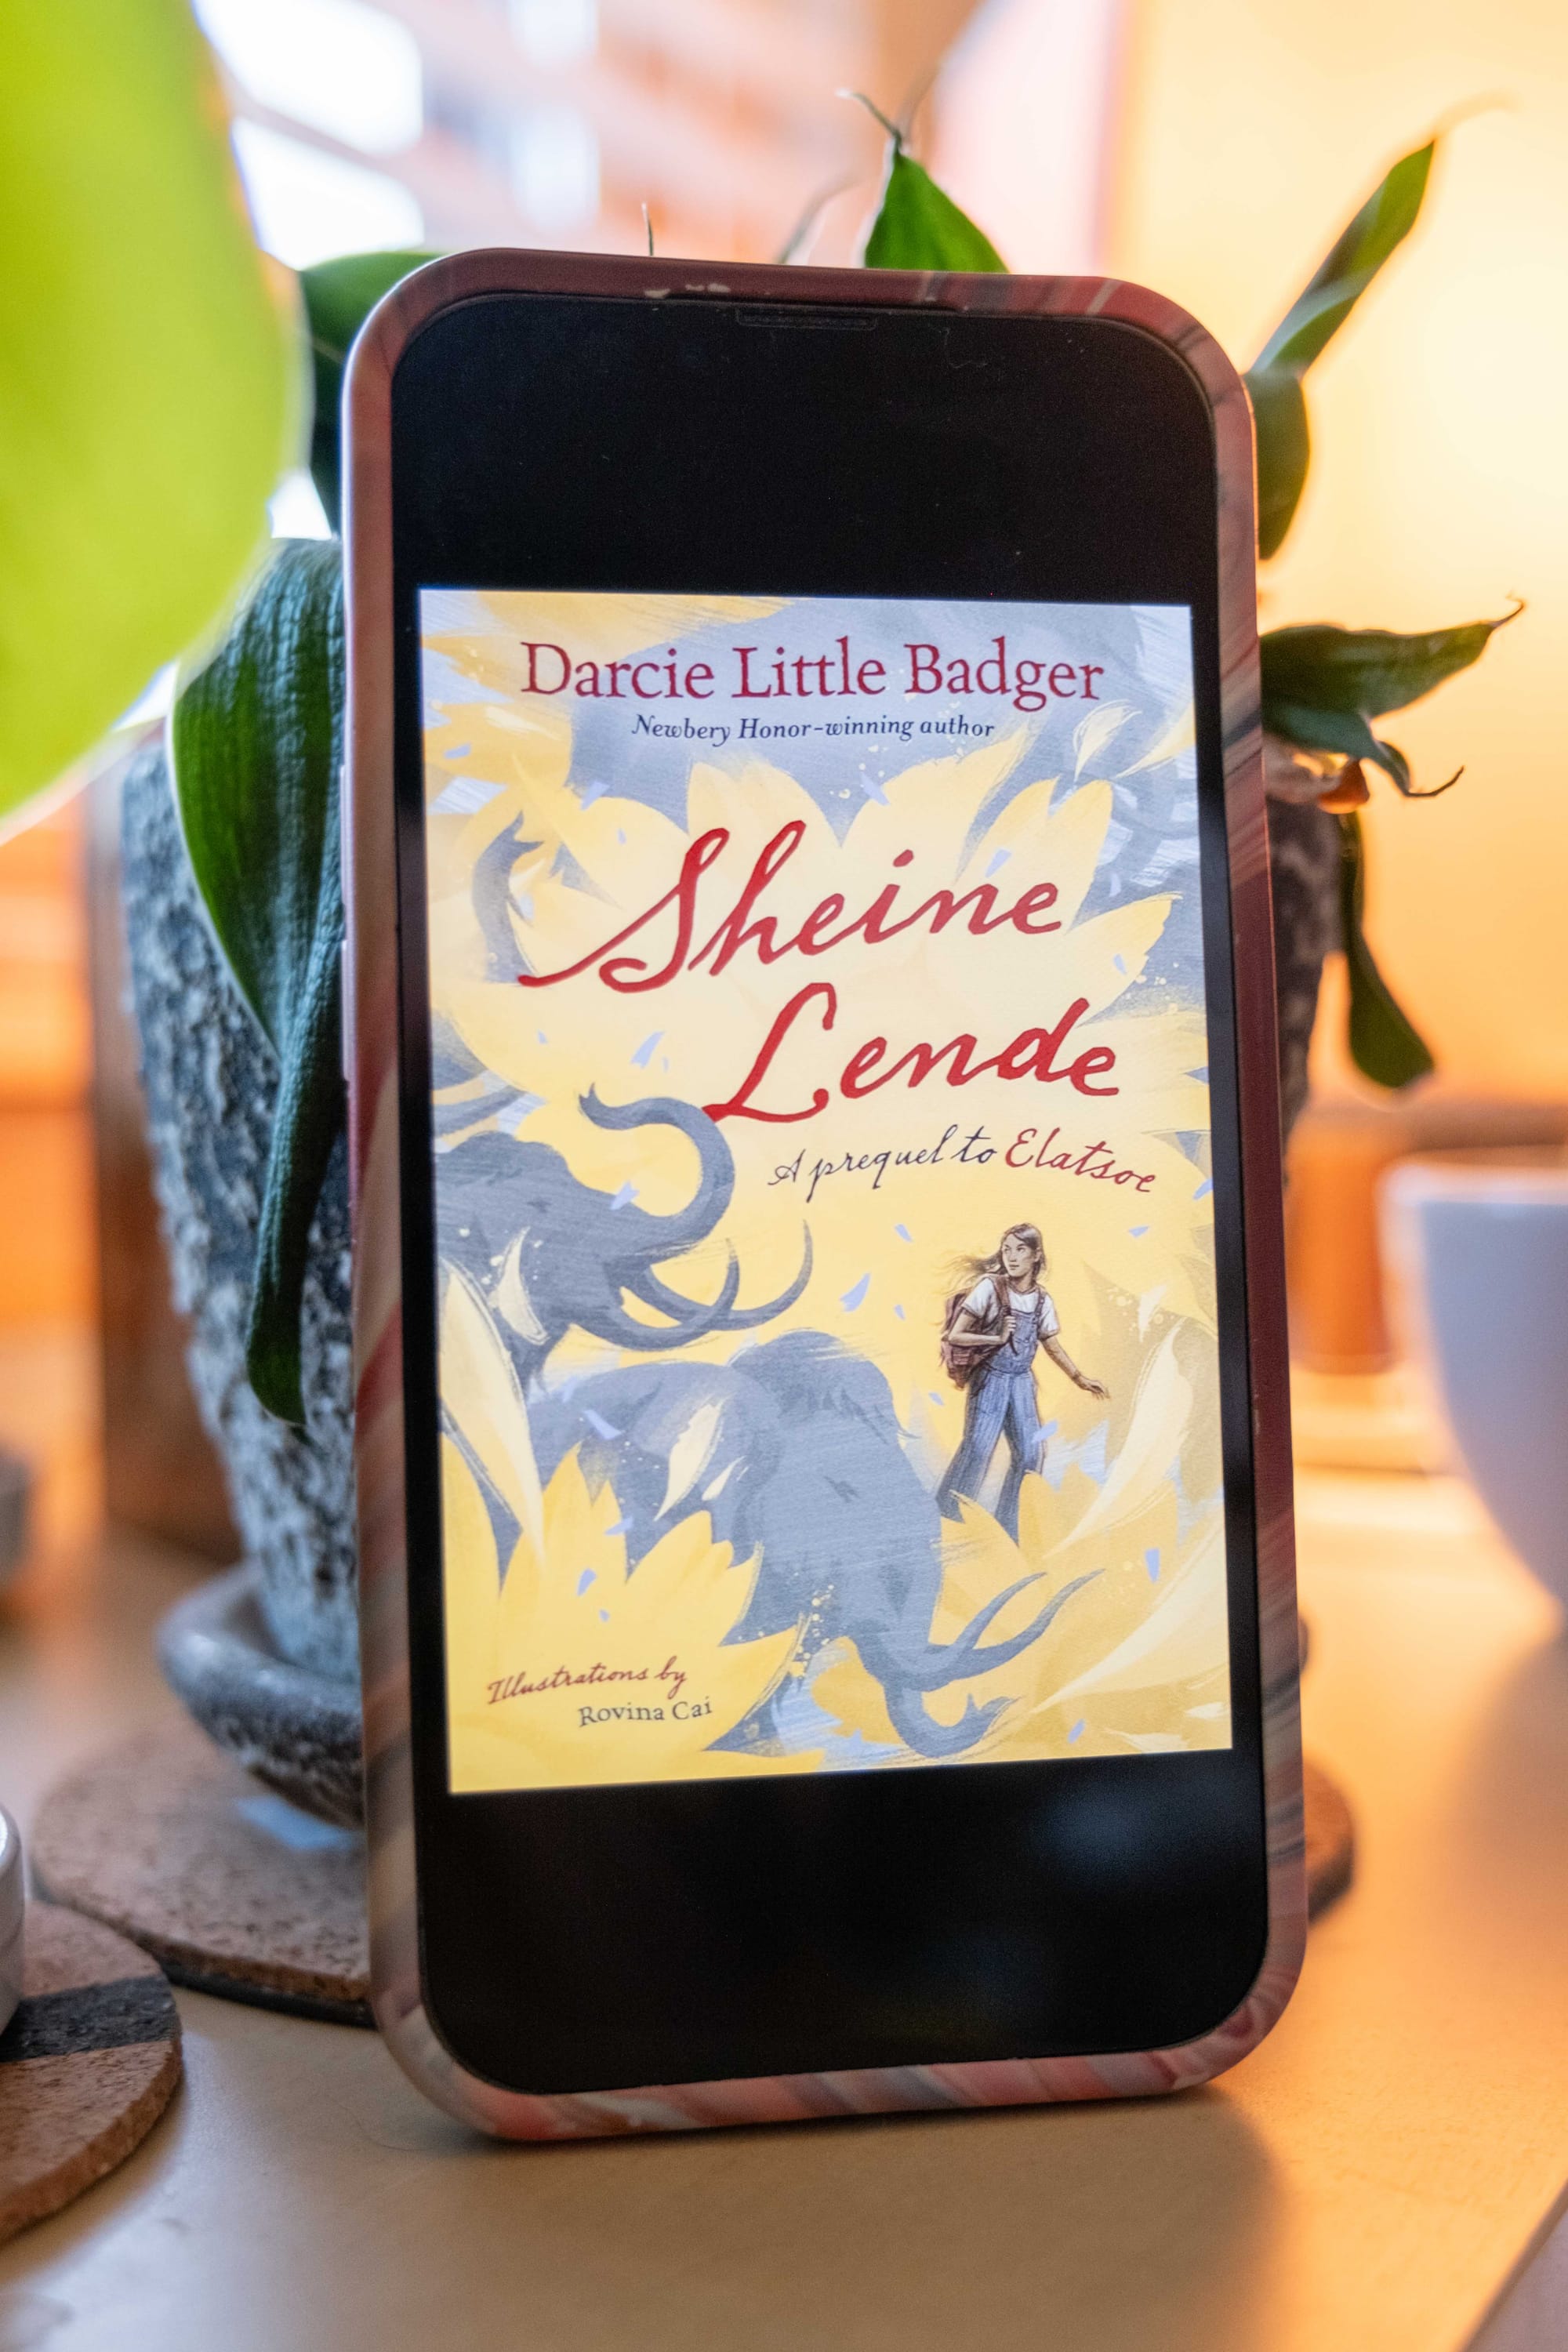 Book cover for Sheine Lende: A Prequel to Elatsoe by Darcie Little Badger on an iPhone